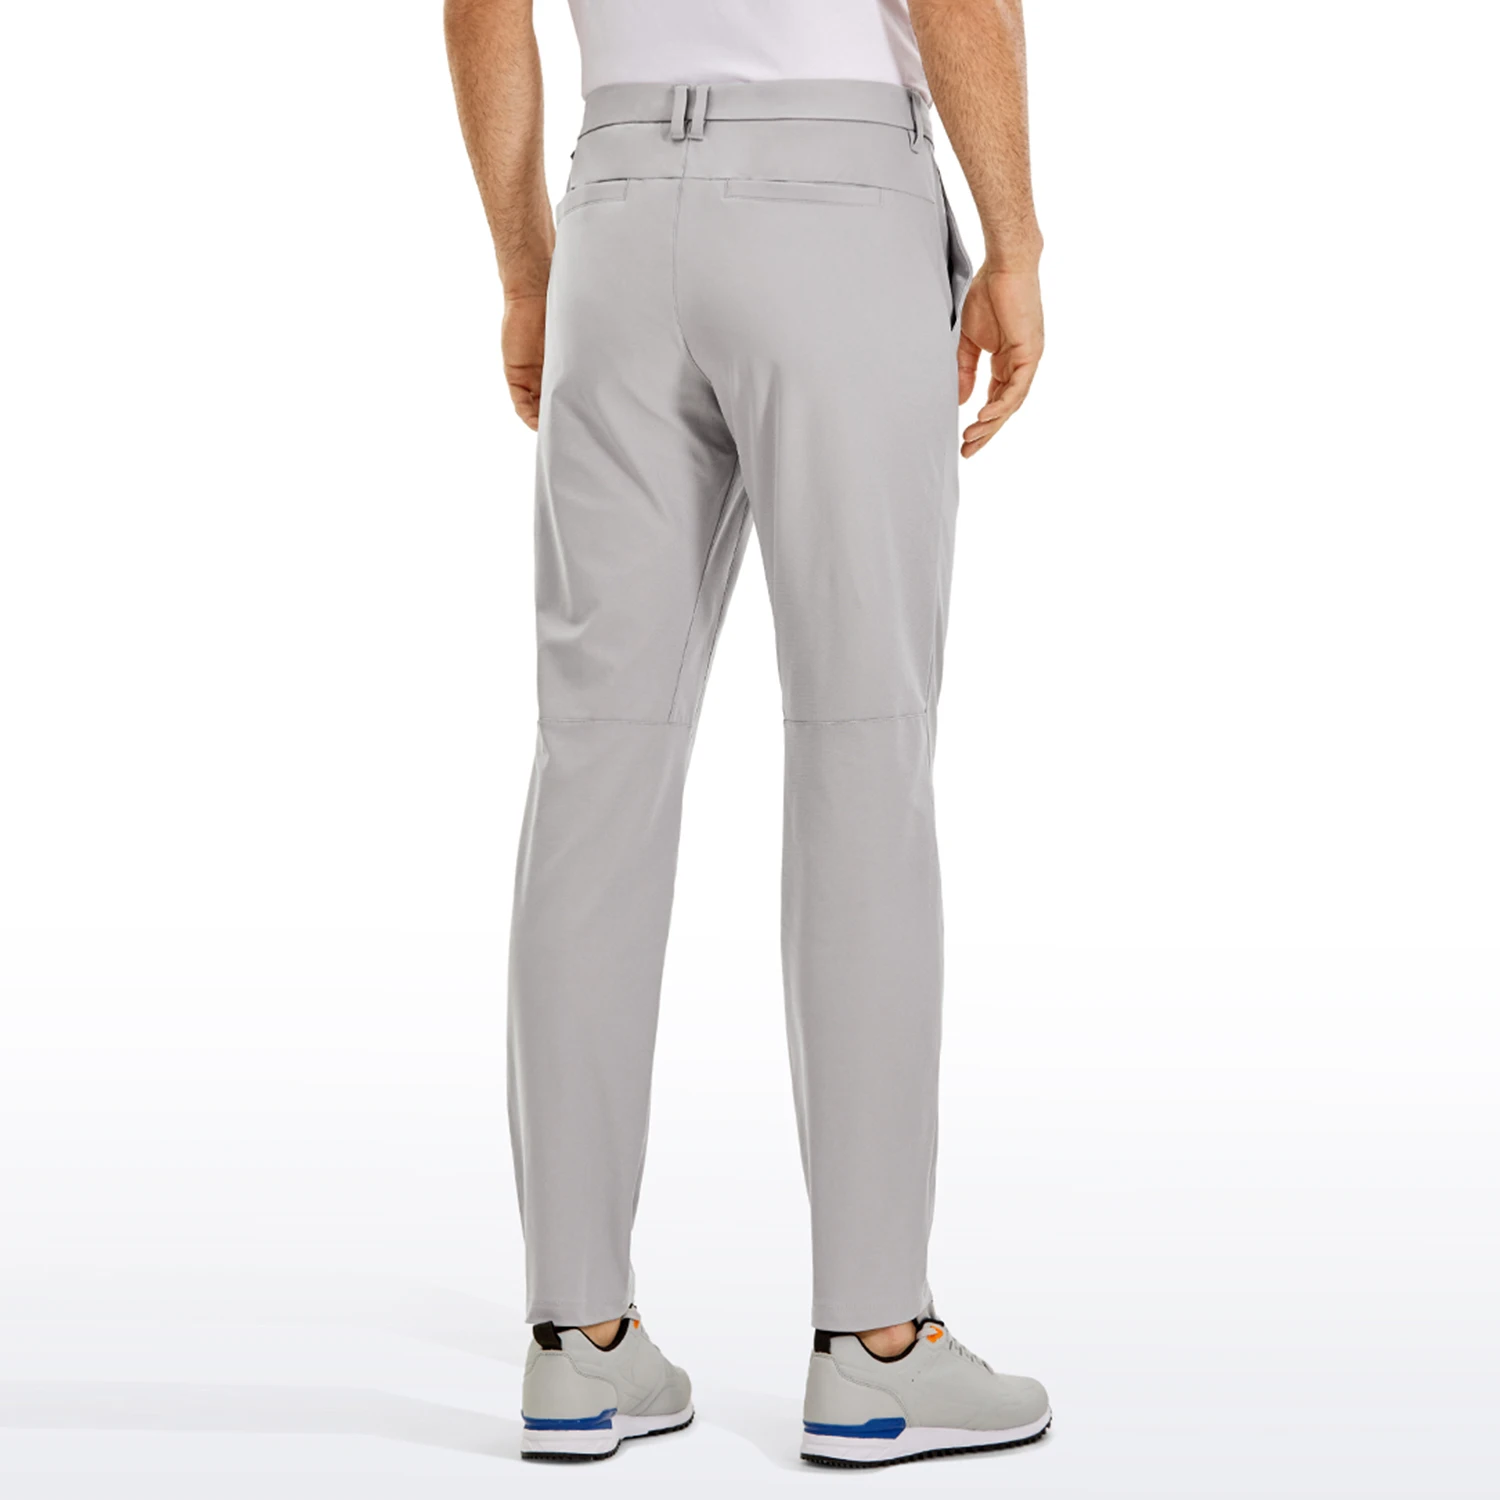 CRZ YOGA Men's All-day Comfort Golf Pants - 32 Quick Dry Lightweight Work  Casual Trousers with Pockets